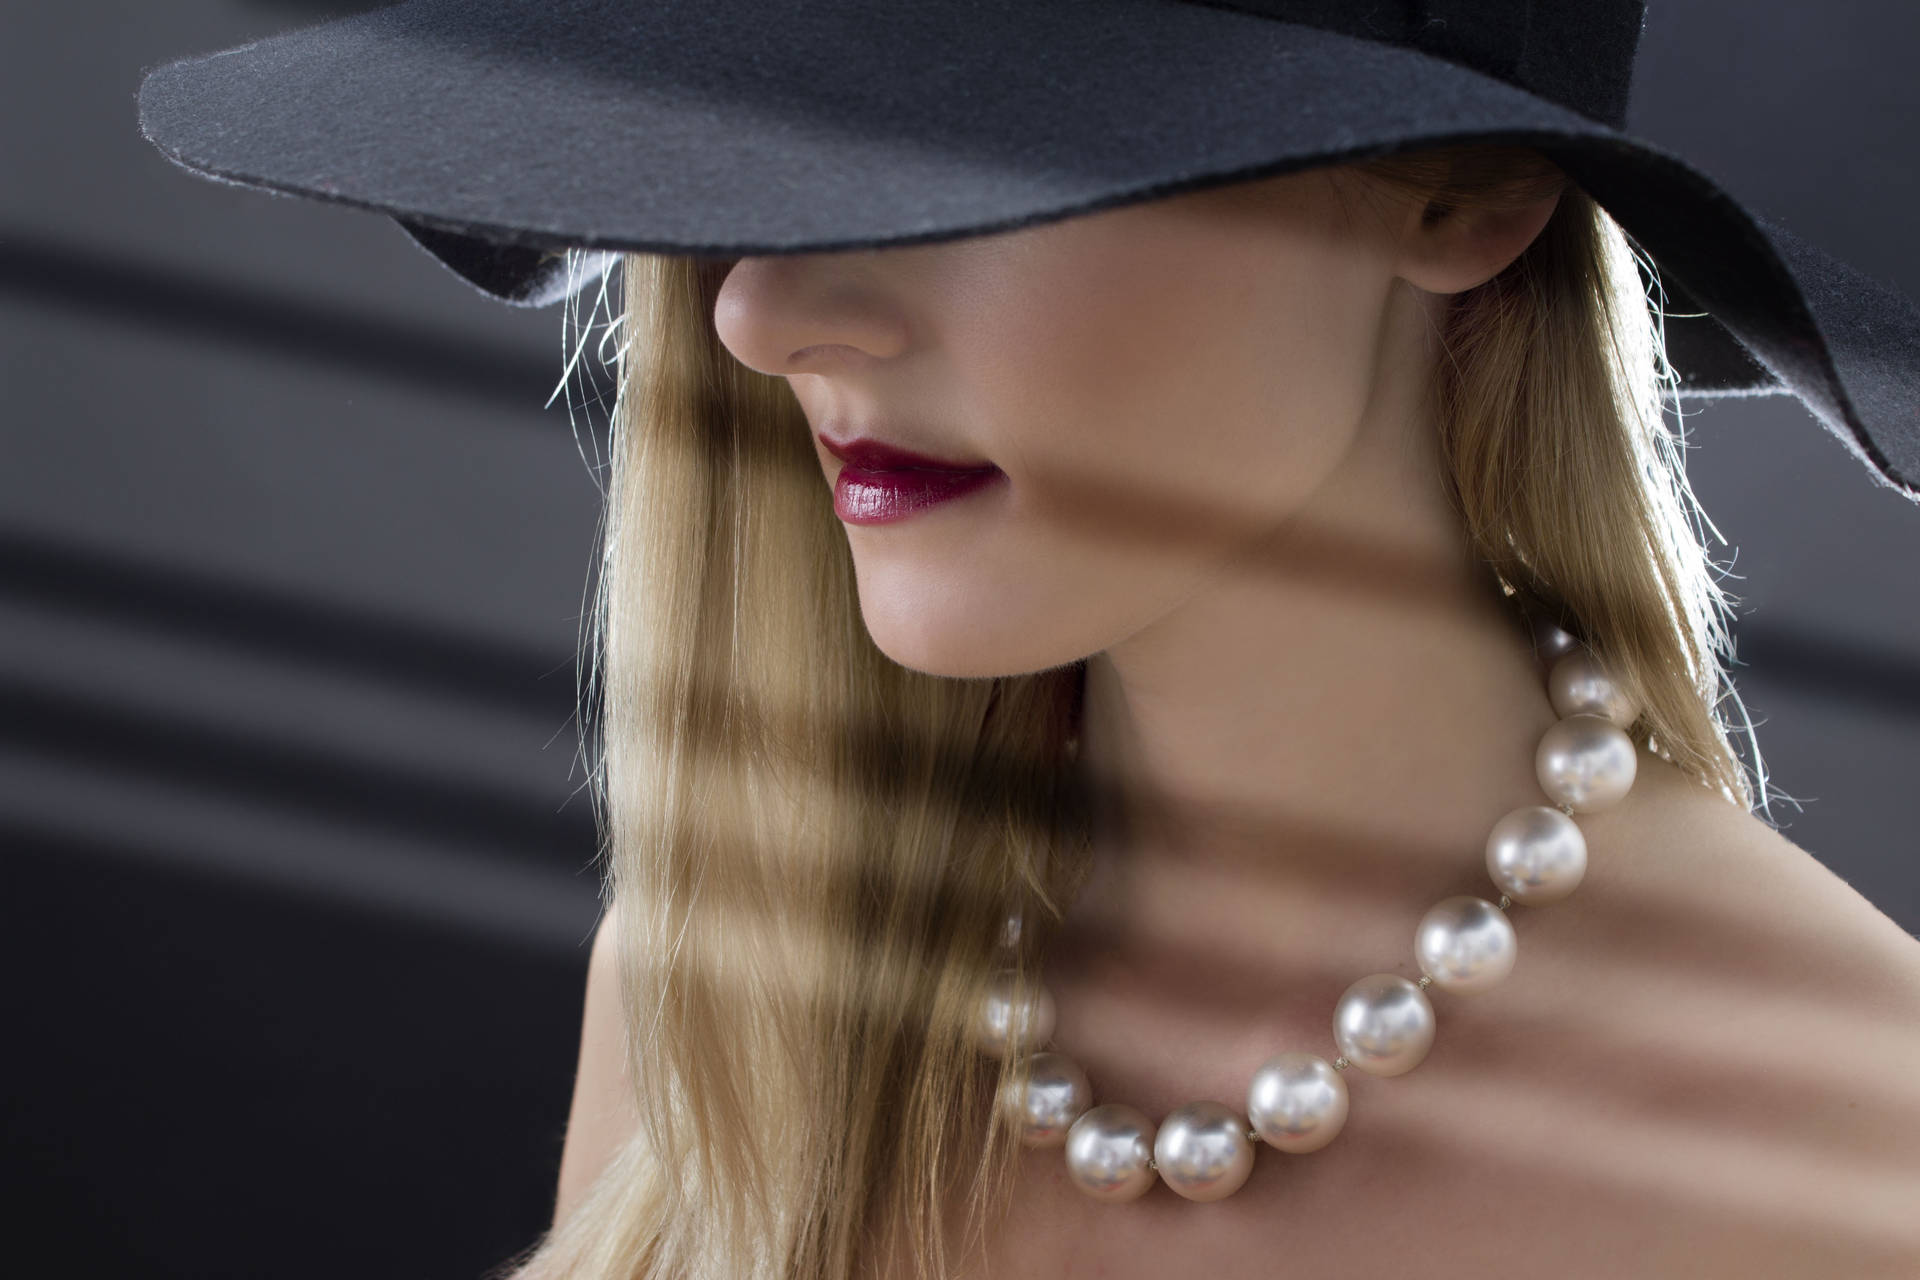 Hat Model In Pearls Background